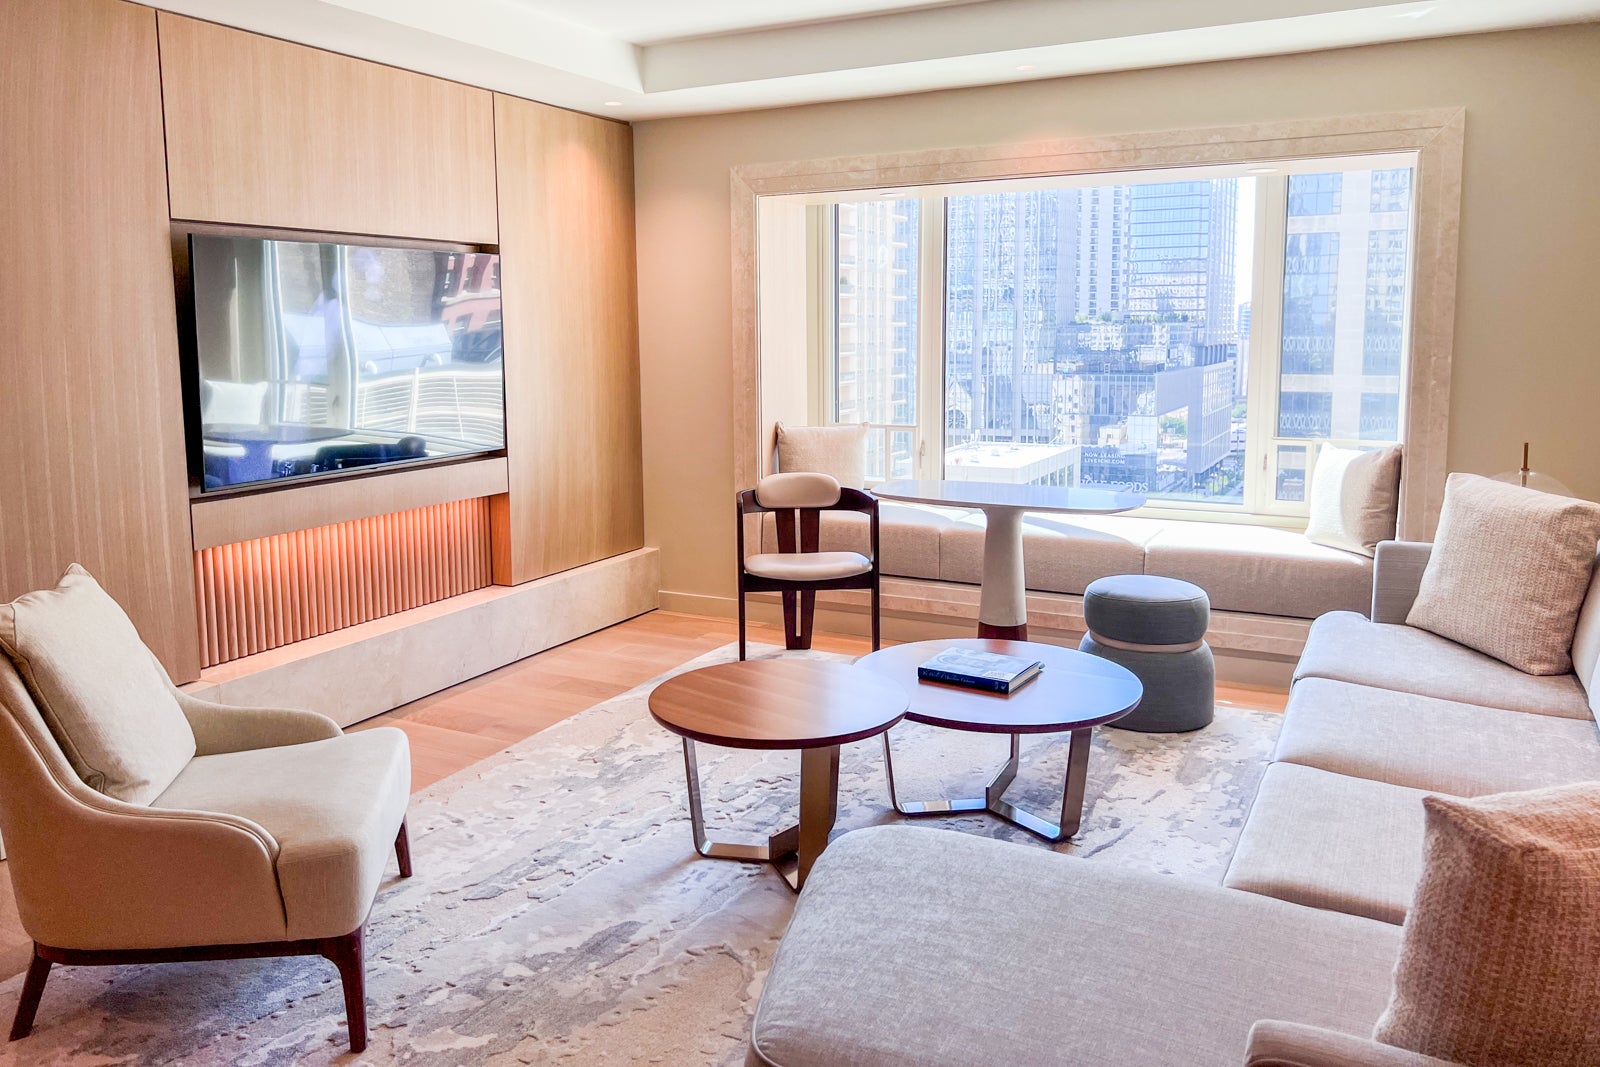 A luxe city legend reborn: My two nights at the renovated Park Hyatt Chicago